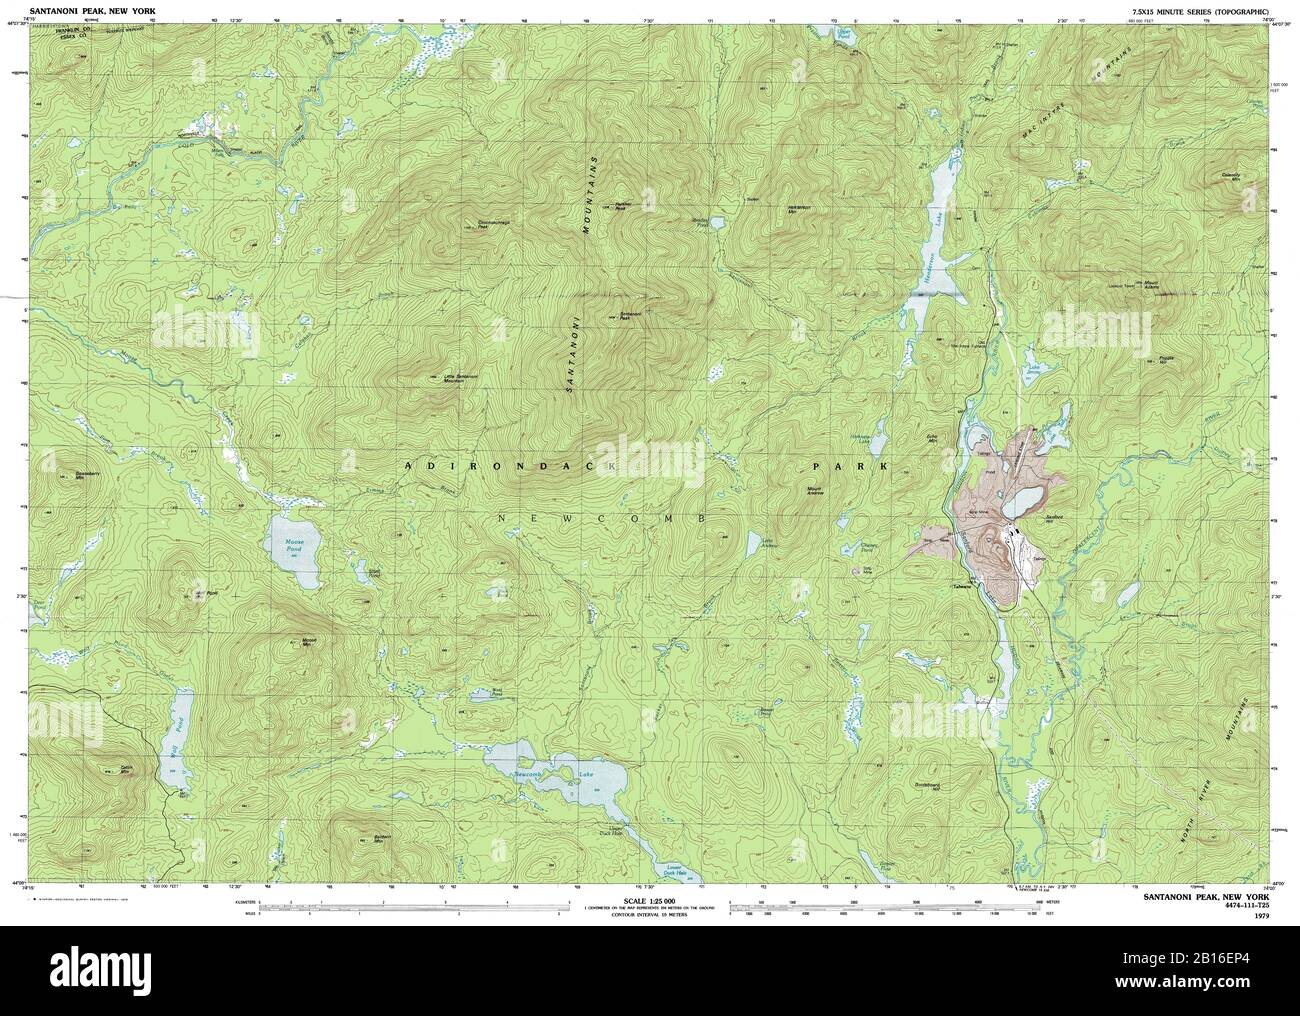 Highly detailed view of the 1979 topographic map for Santanoni Peak, NY Stock Photo